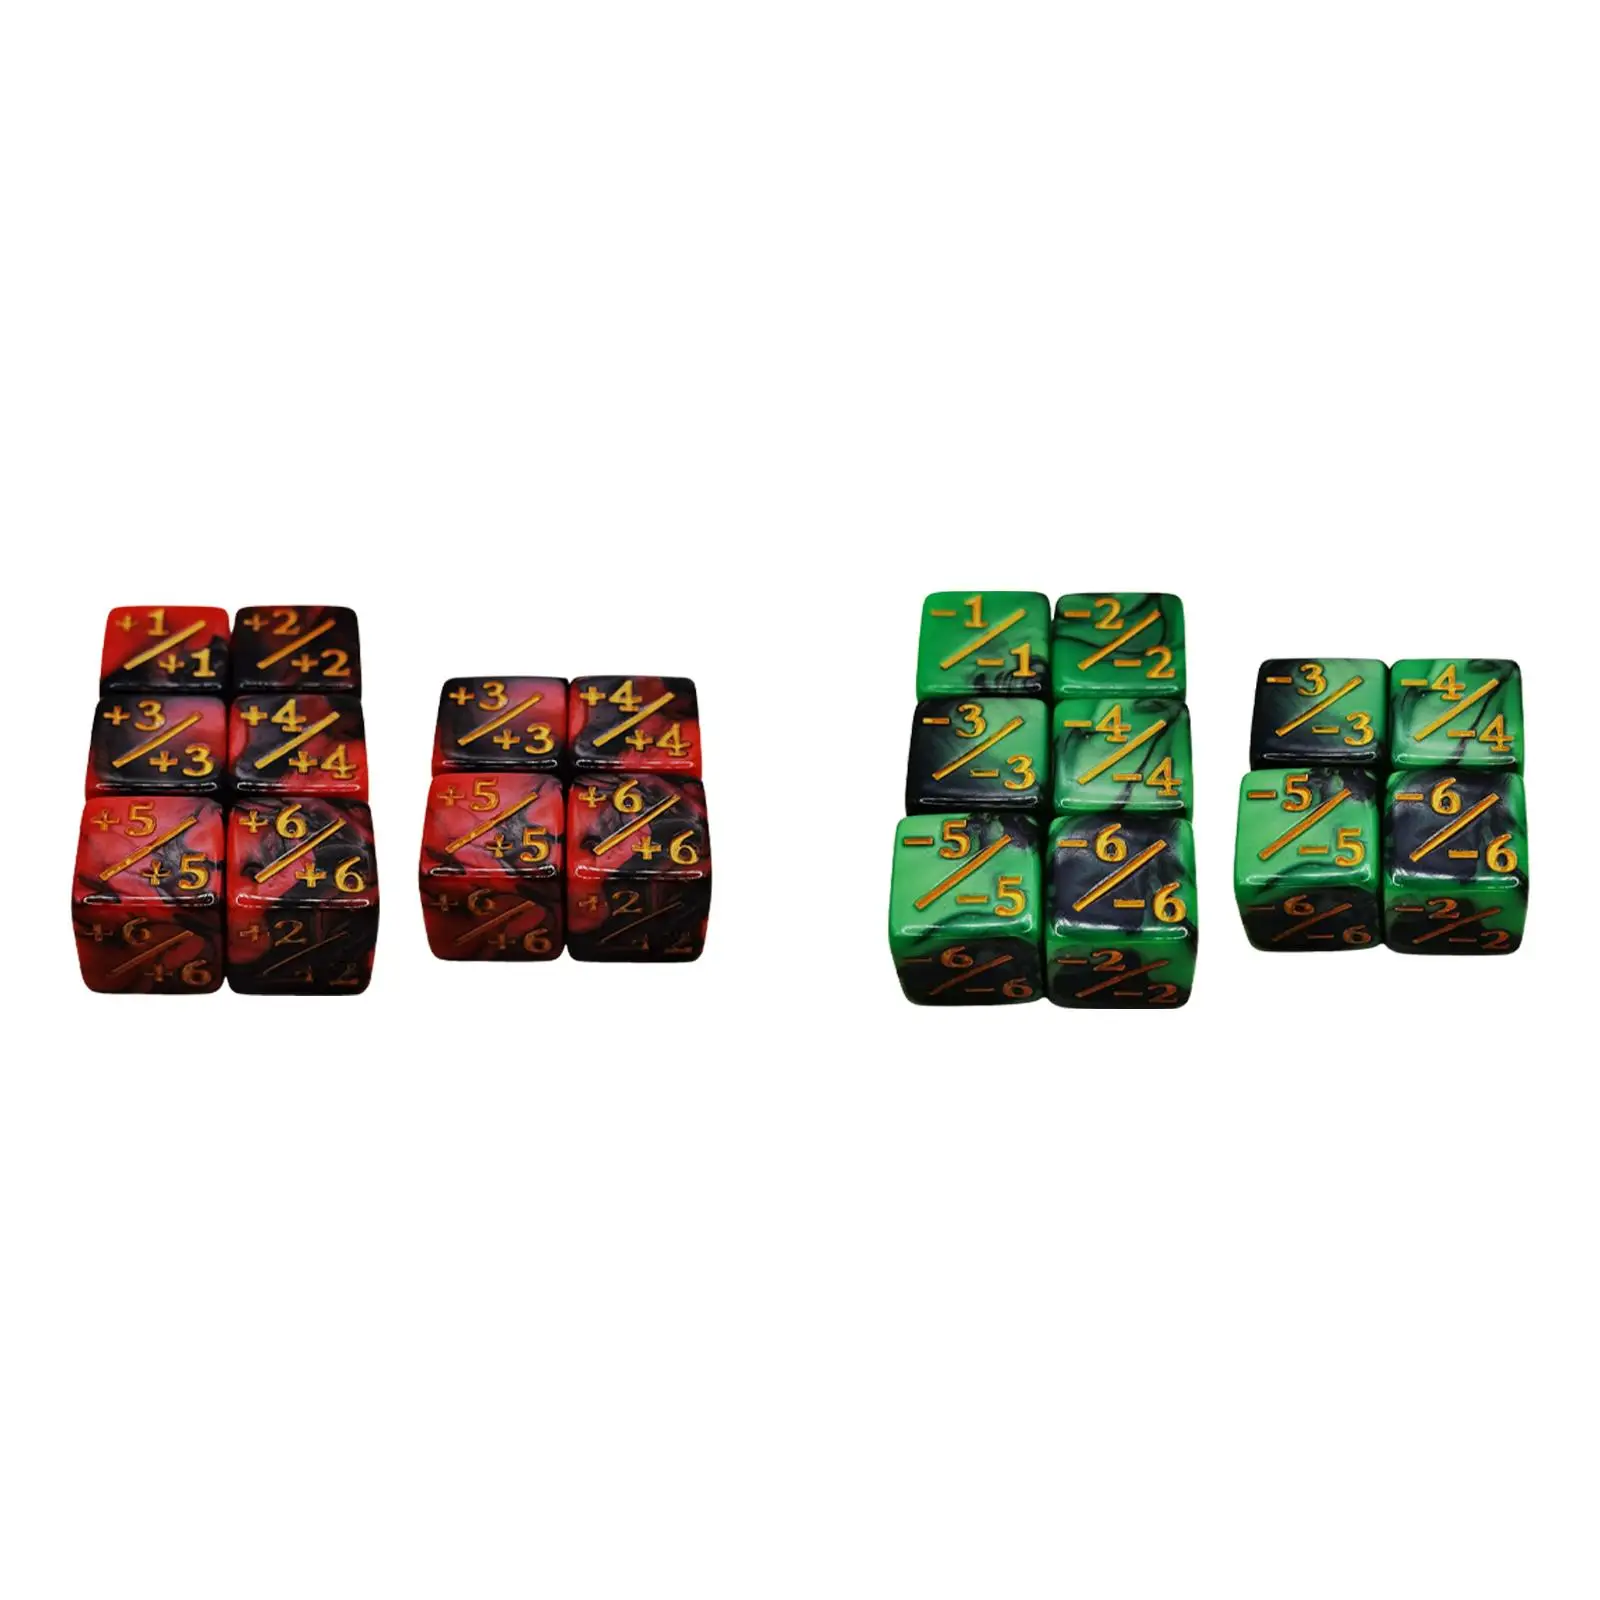 10Pcs Counter Dice Table Game Dices D6 Acrylic Six Sided Dice Set for Kids Toys Children Toys Tabletop Game Role Play Preschool